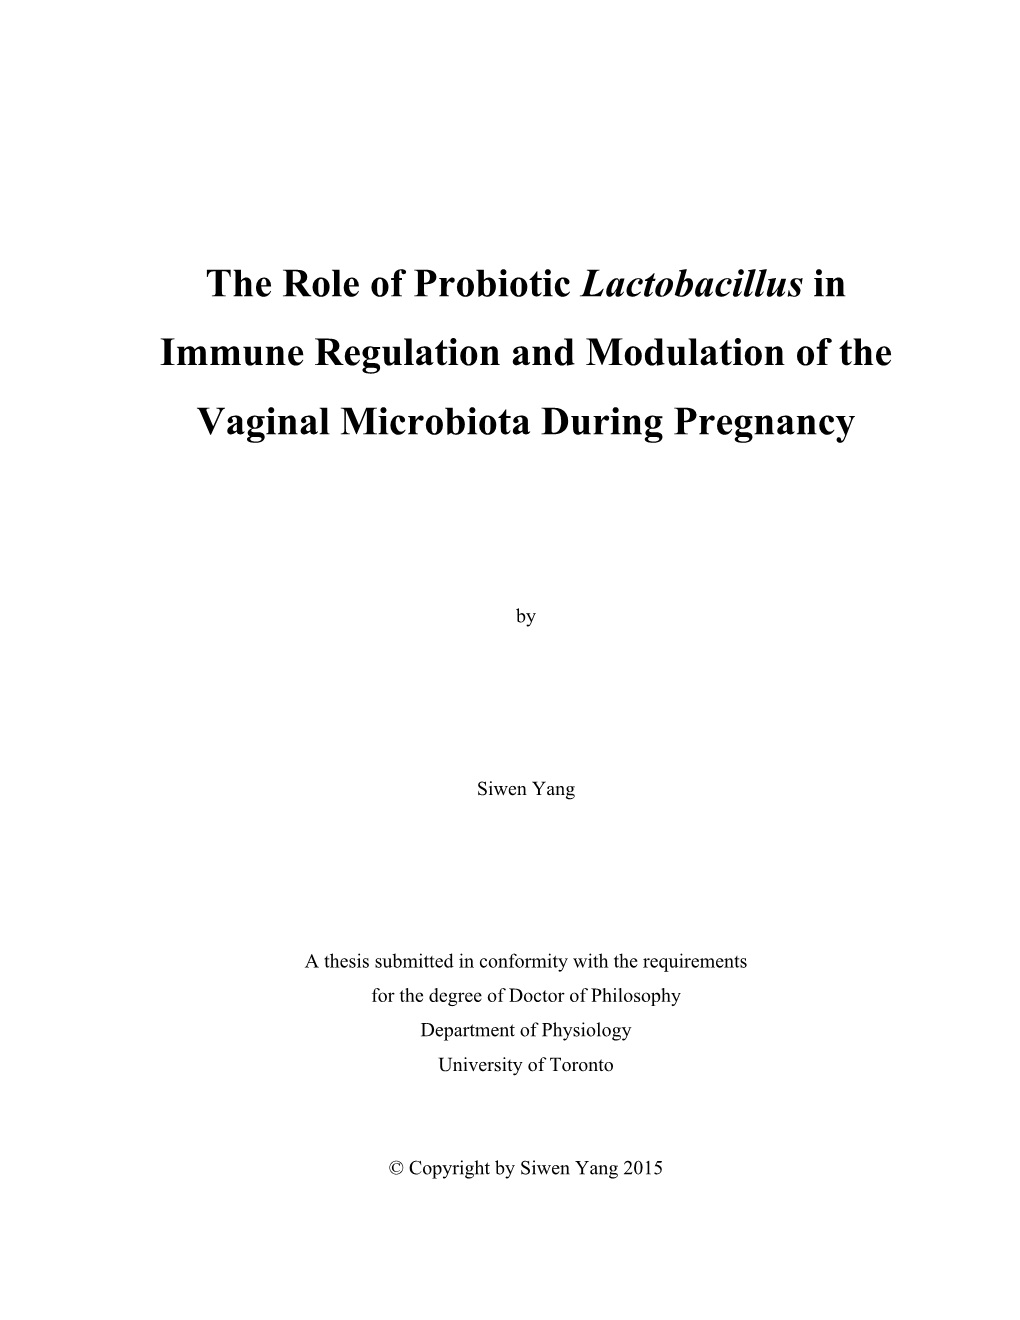 The Role of Probiotic Lactobacillus in Immune Regulation and Modulation of the Vaginal Microbiota During Pregnancy